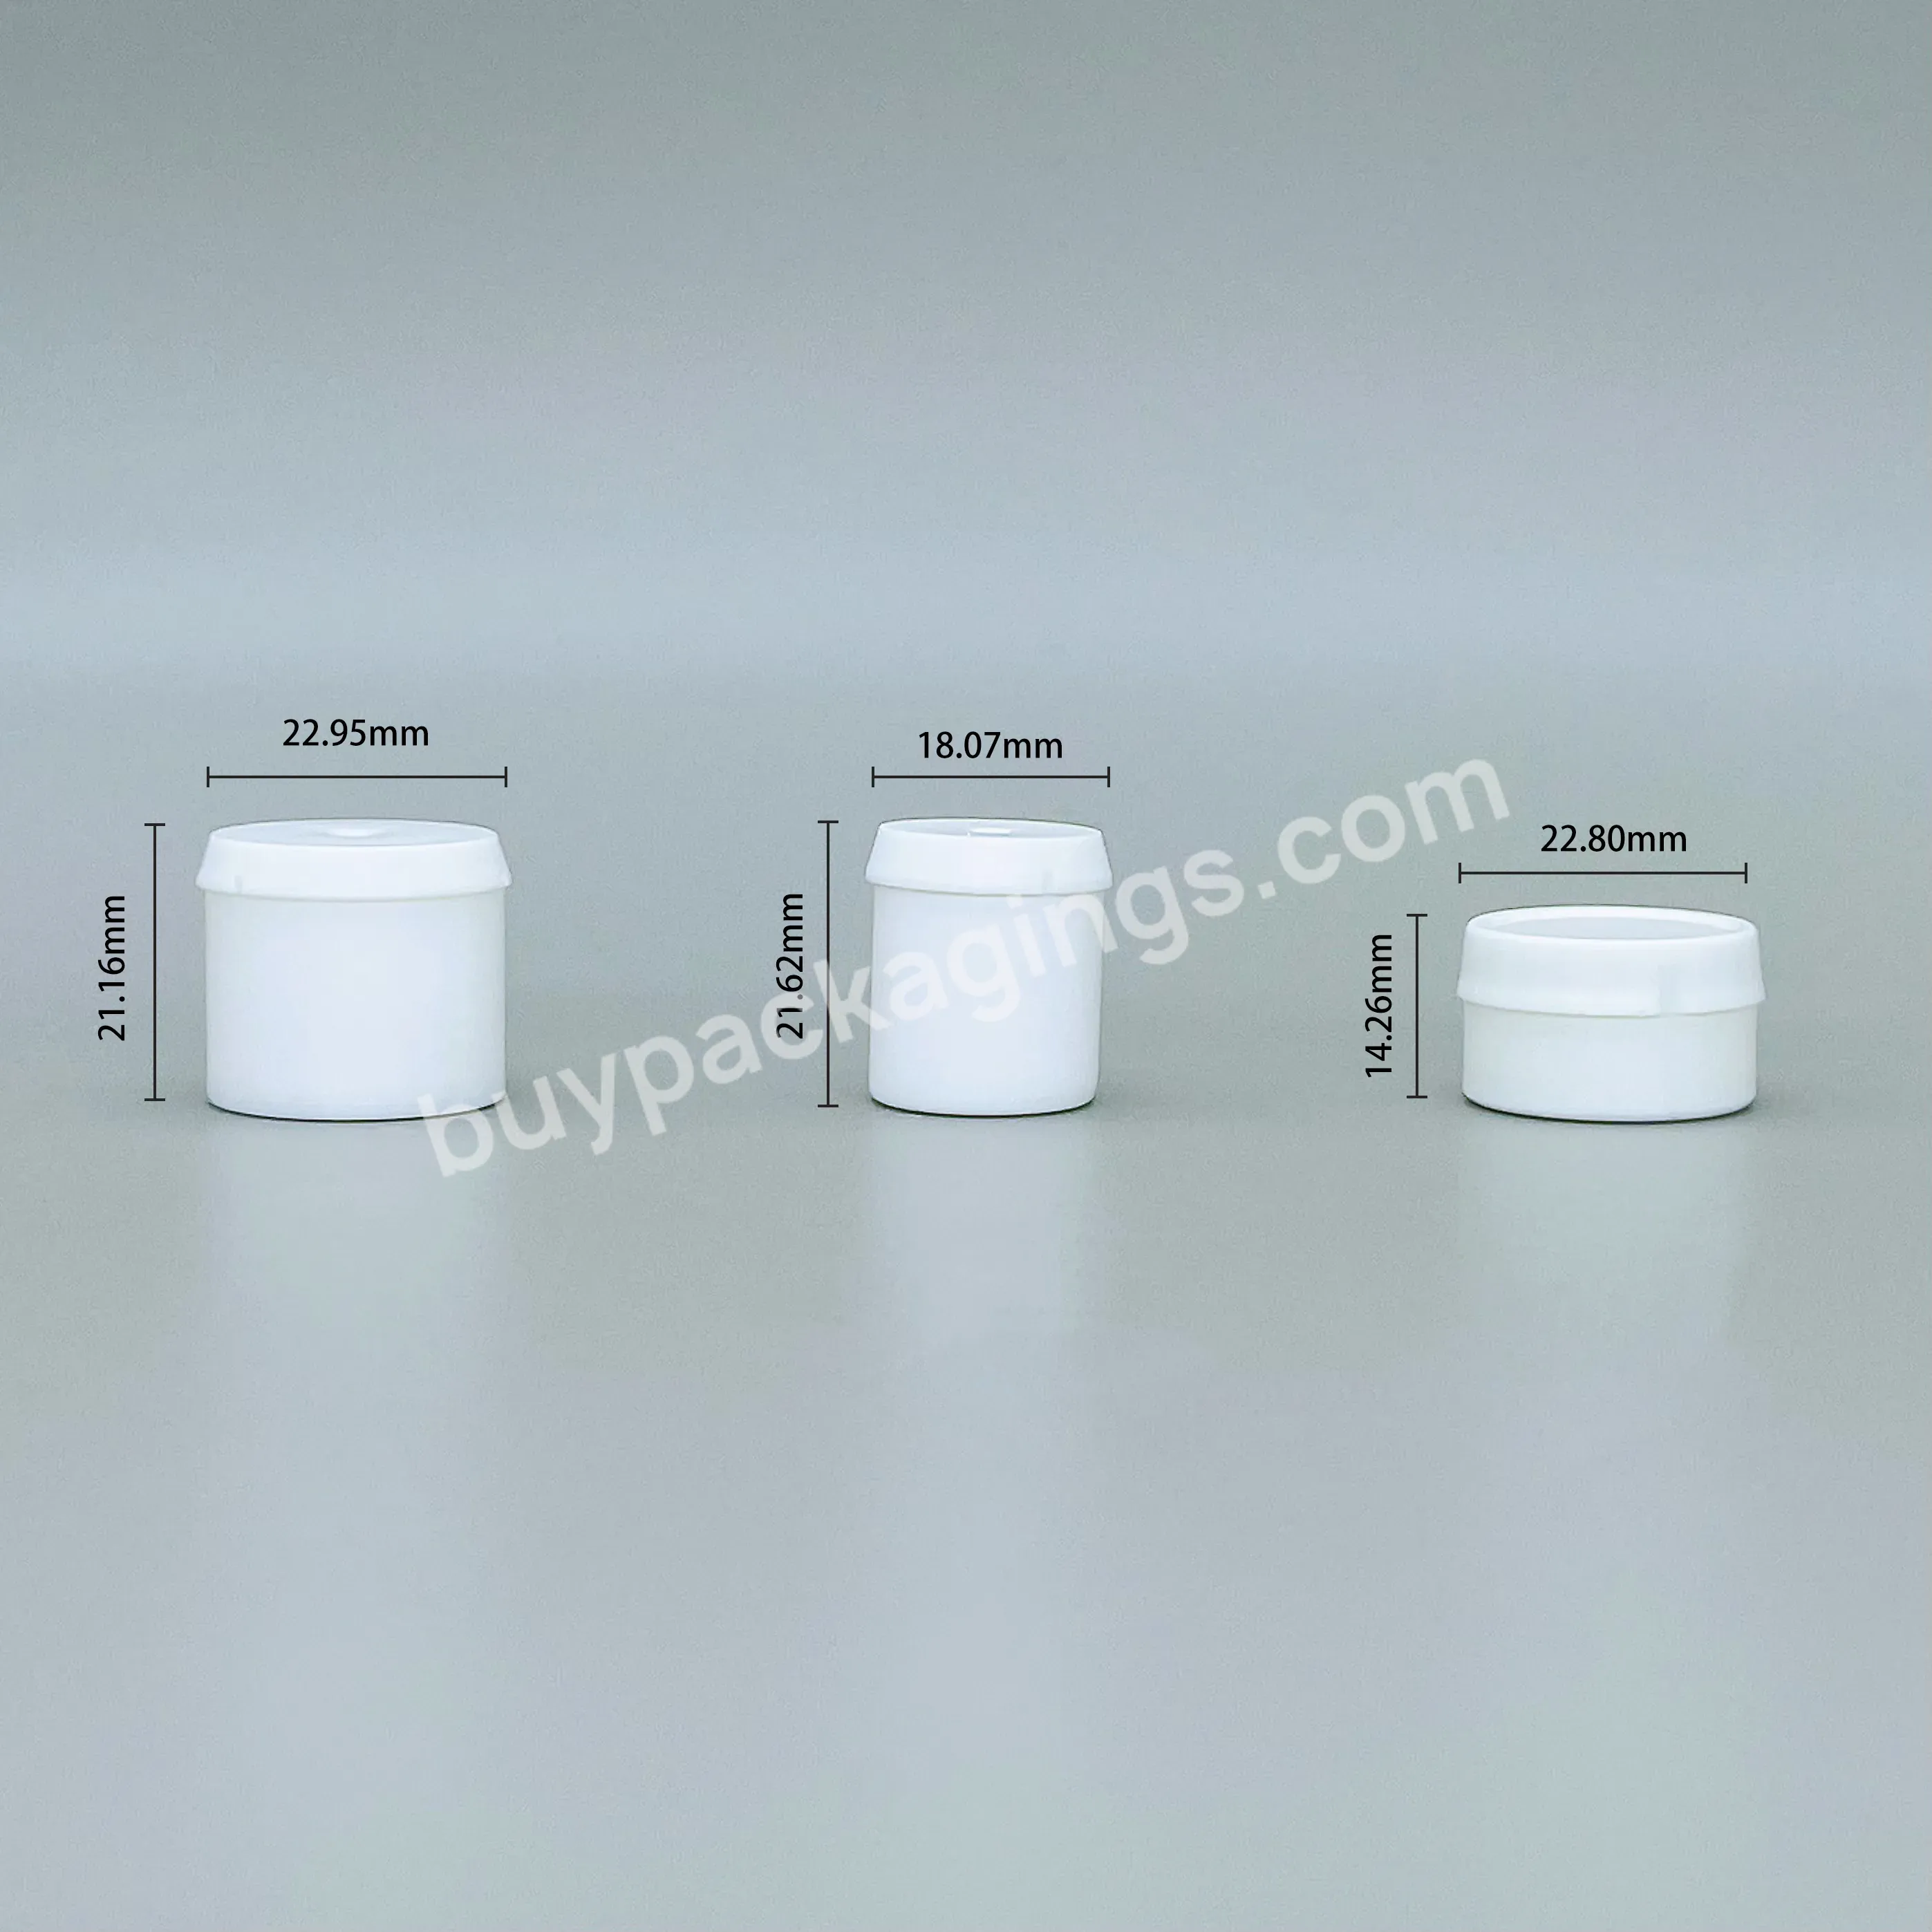 Health Food Sorbent Desiccant Cover Silica Gel Desiccant Lid For Complementary Pharmacy Capsule And Tablets Moisture Absorbing - Buy Silica Gel Desiccant Covers,Pharmacy Capsule Desiccant,Silica Gel Desiccant Canister.